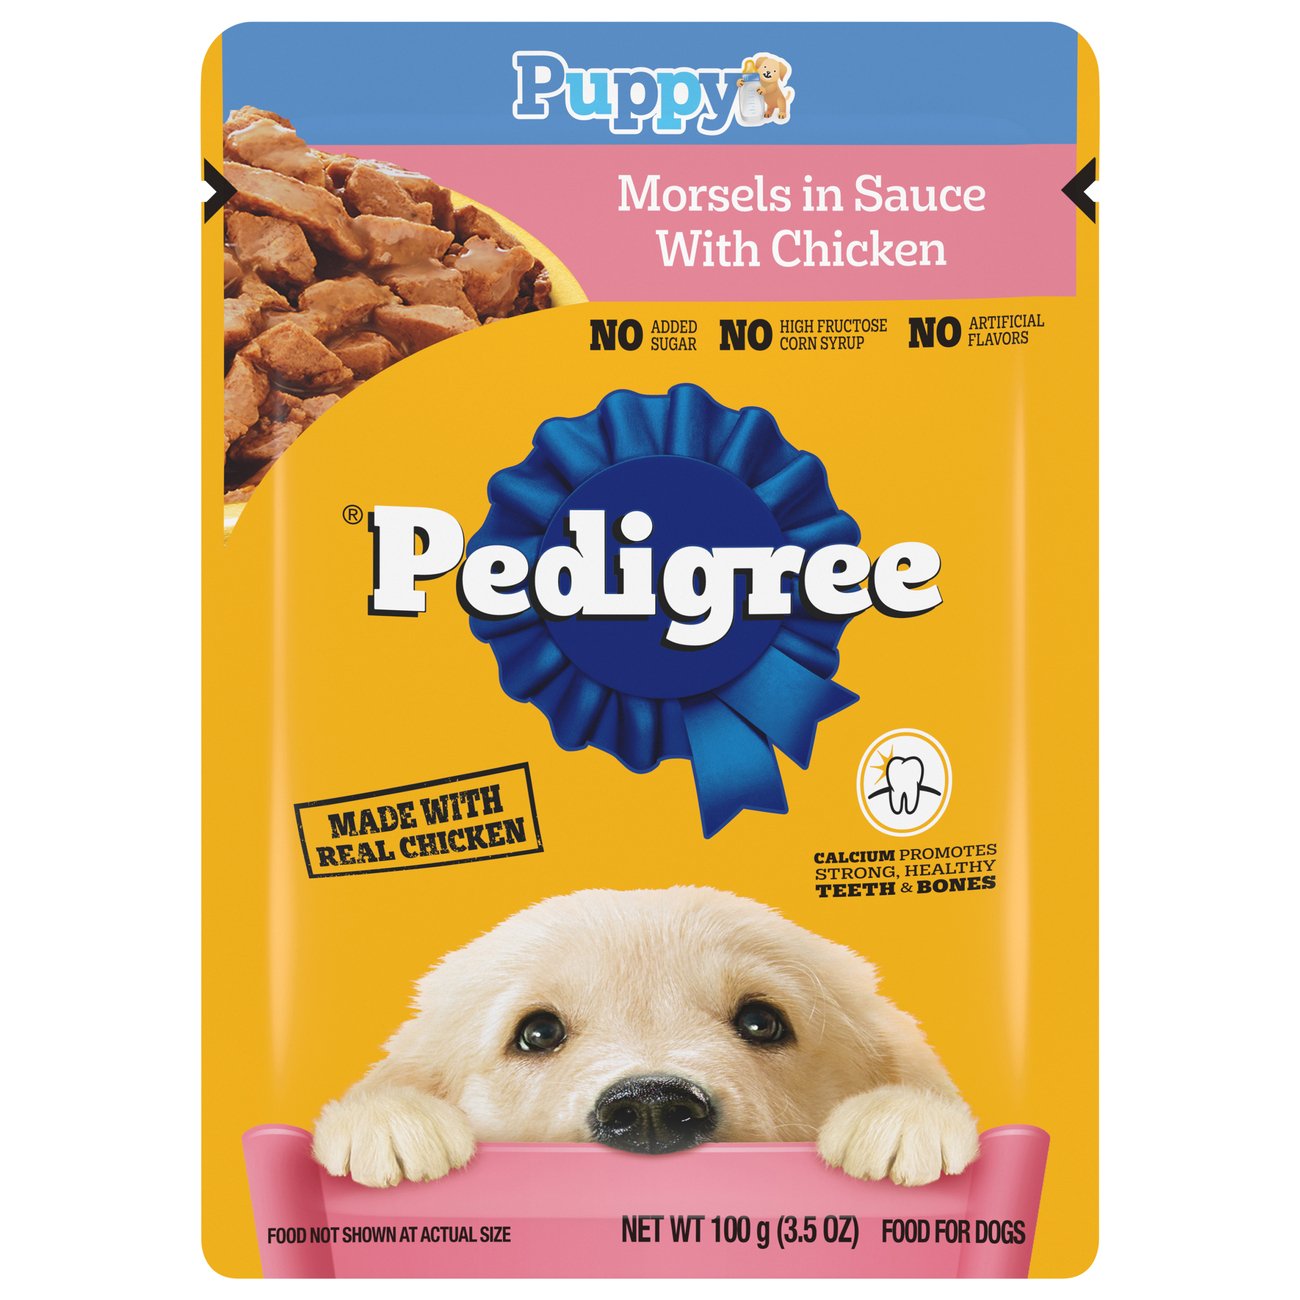 what is a pedigree puppy